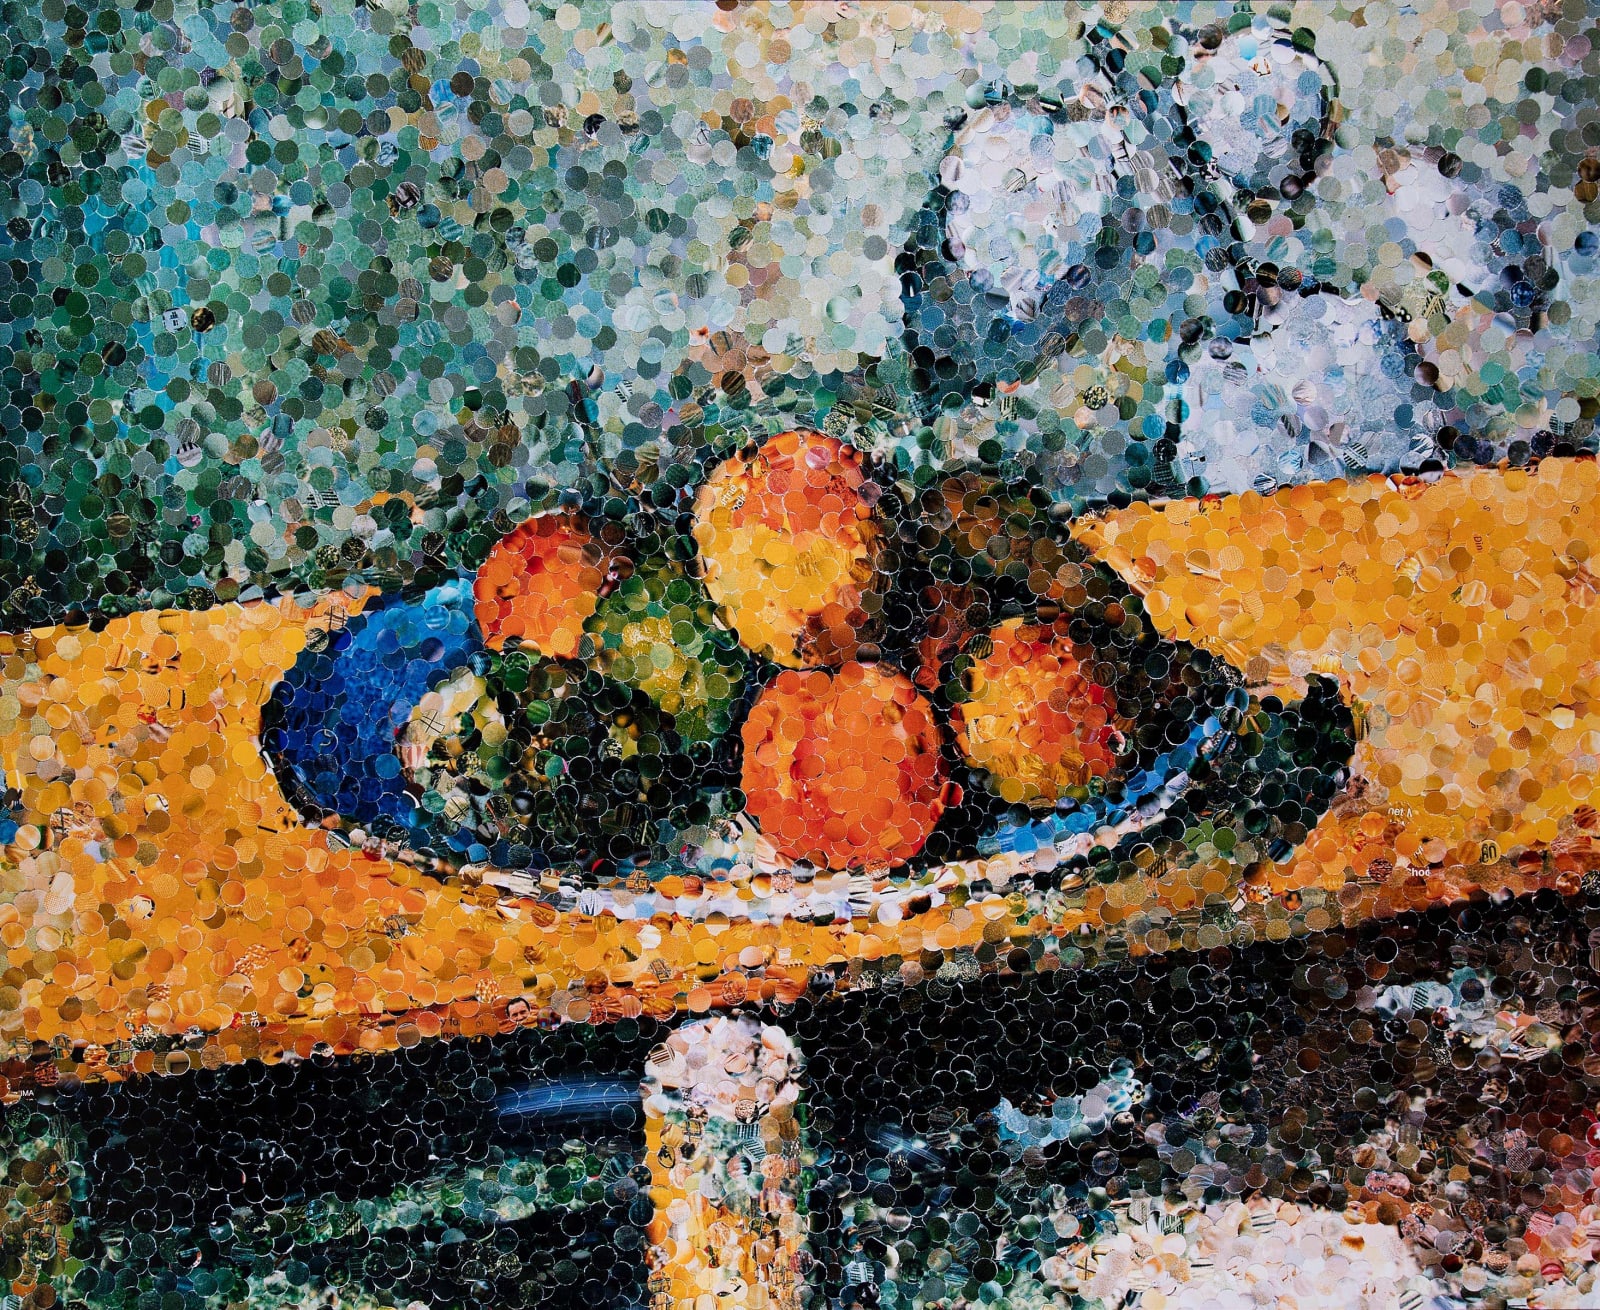 Vik Muniz Apples Peaches Pears and Grapes After Cezanne picture of hole punched magazine to imitate Cezanne painting of fruit